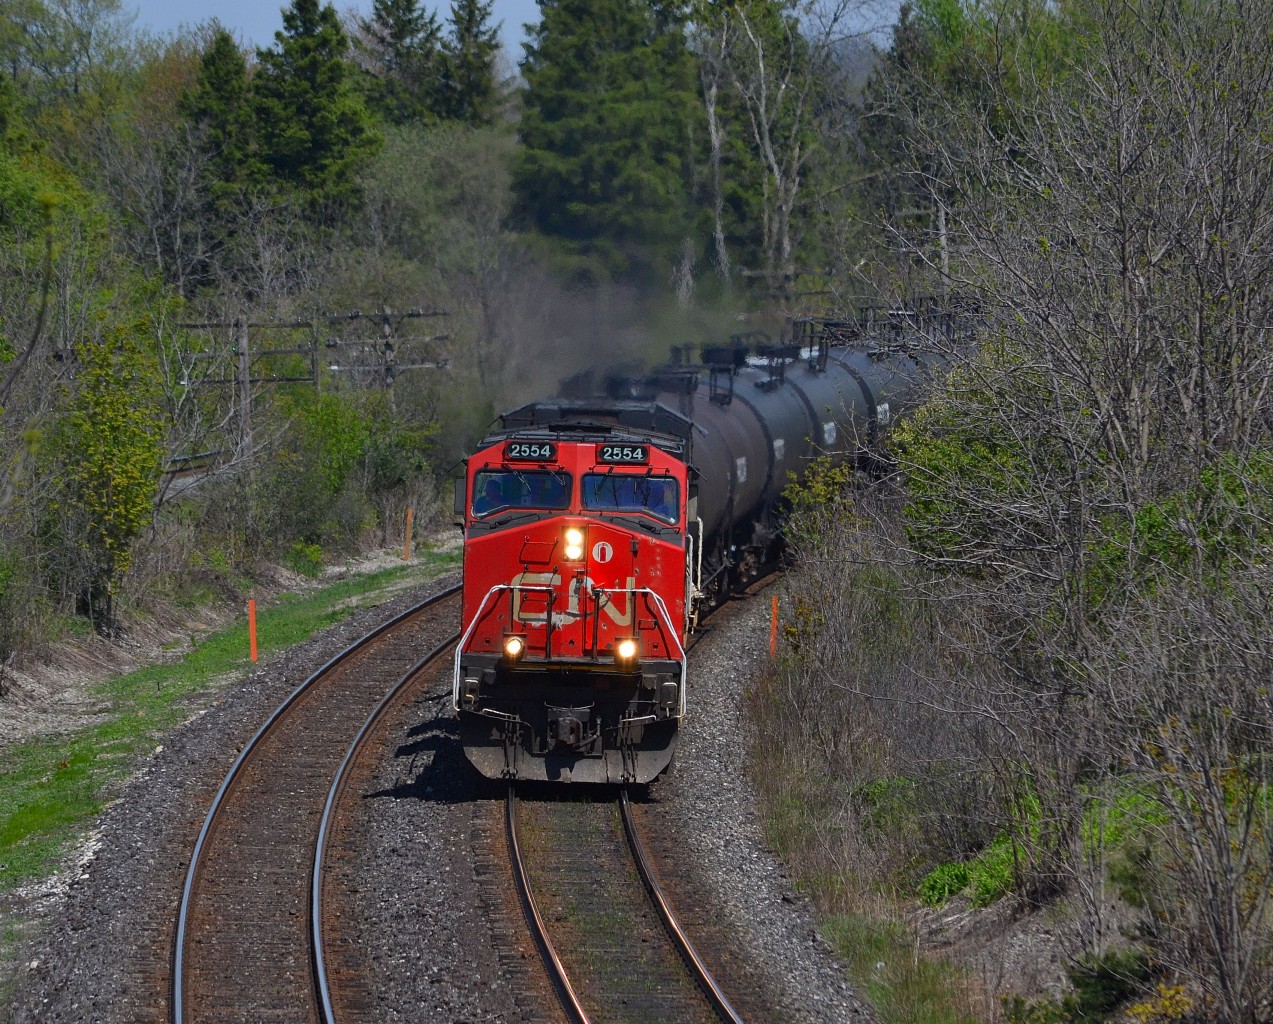 CN 331 led by CN 2554 & BCOL 4650, rounds the bend at the Denfield Bridge after just departing London.